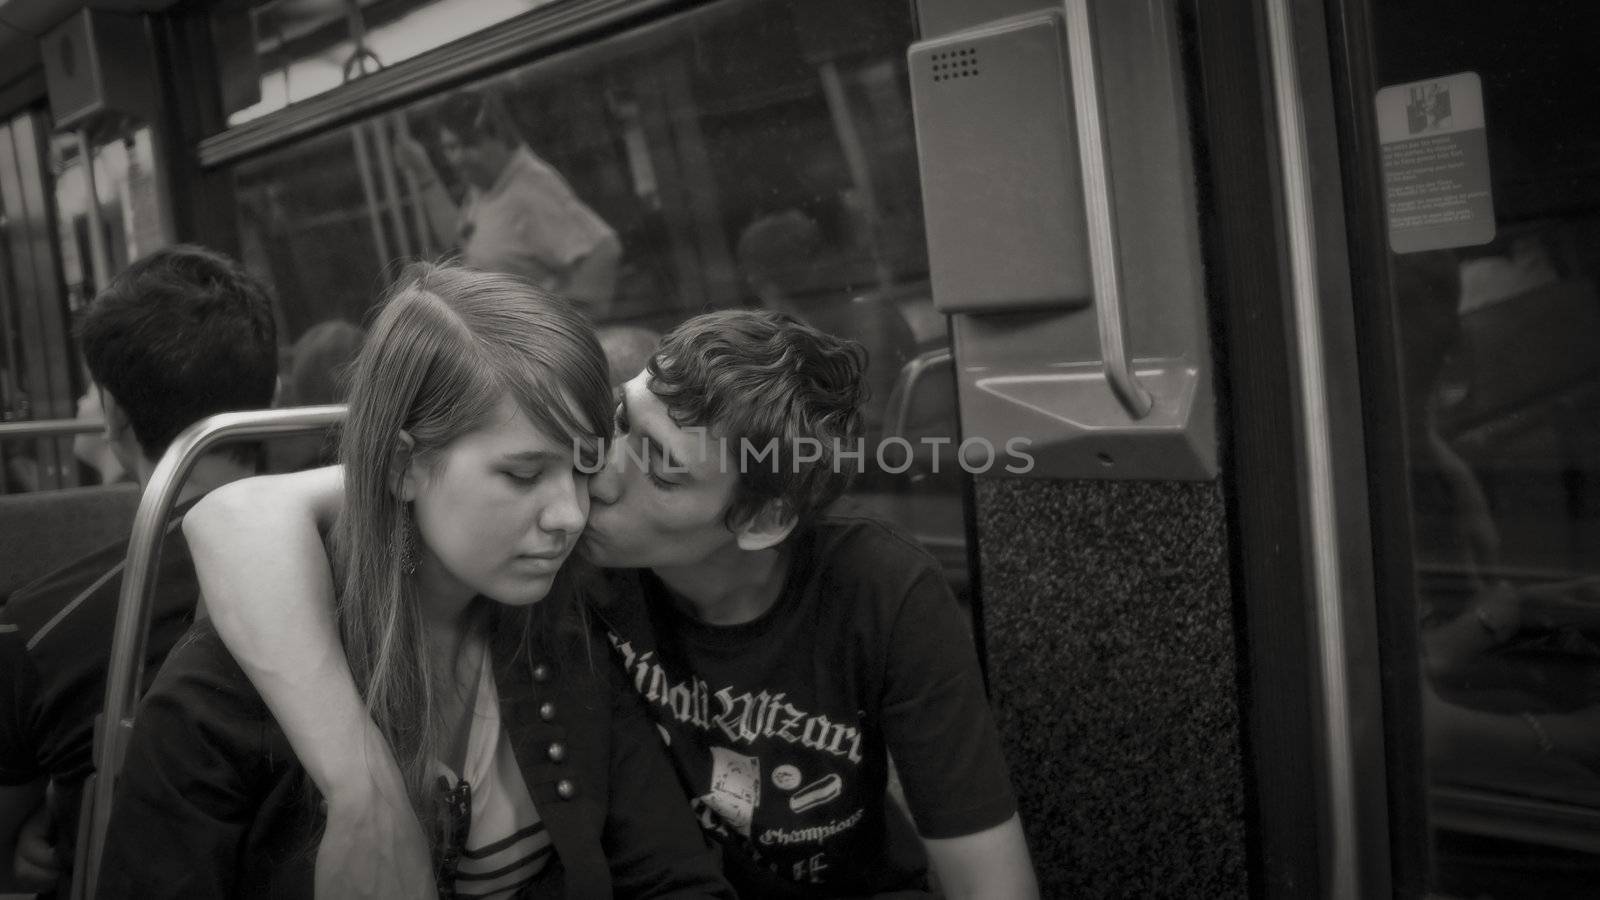 I LOVE YOU MY DEAR, PARIS, FRANCE - APRIL 24, 2011: Young couple in love enjoying themselves in the Metro of Paris. Monochrome image.